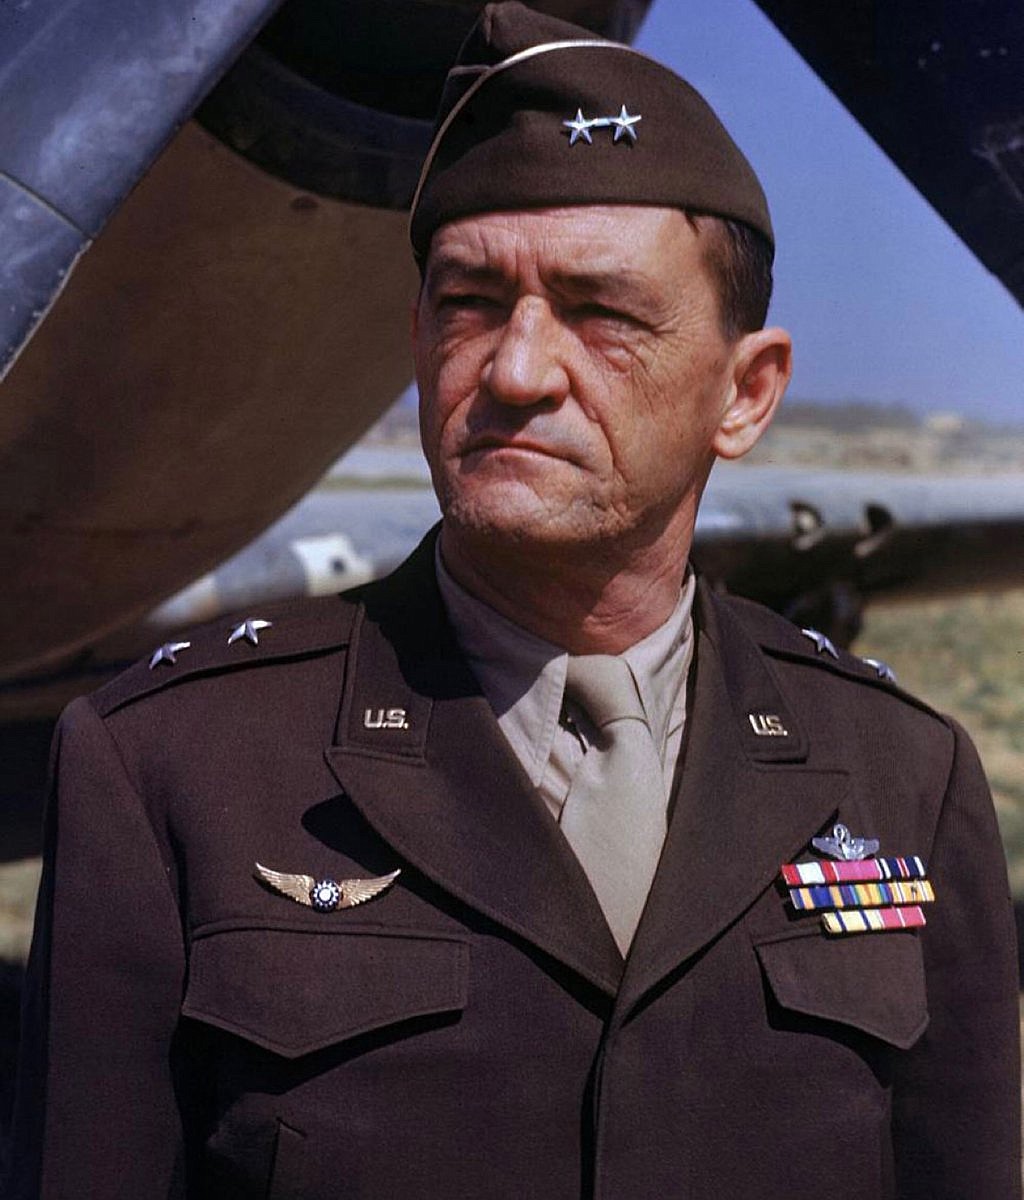 Major General Claire L. Chennault, who organized Flying Tigers American Volunteer Group (AVG) in World War II, later founded Air America used for covert operations by the CIA during the Vietnam War.